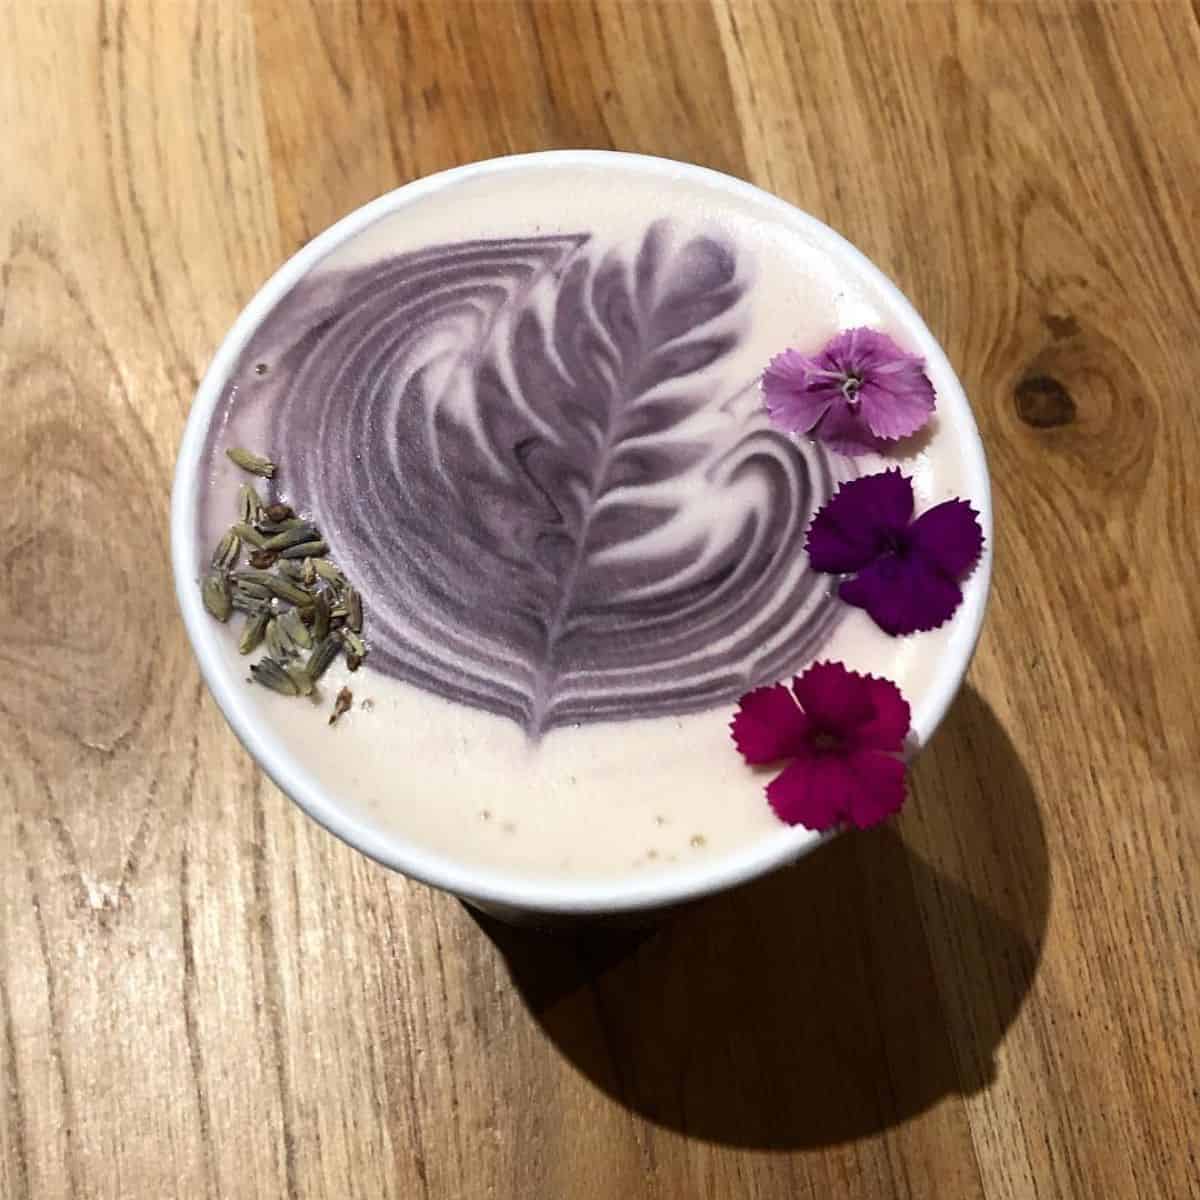 avender Milk Tea adorned with three different purple shades of flowers